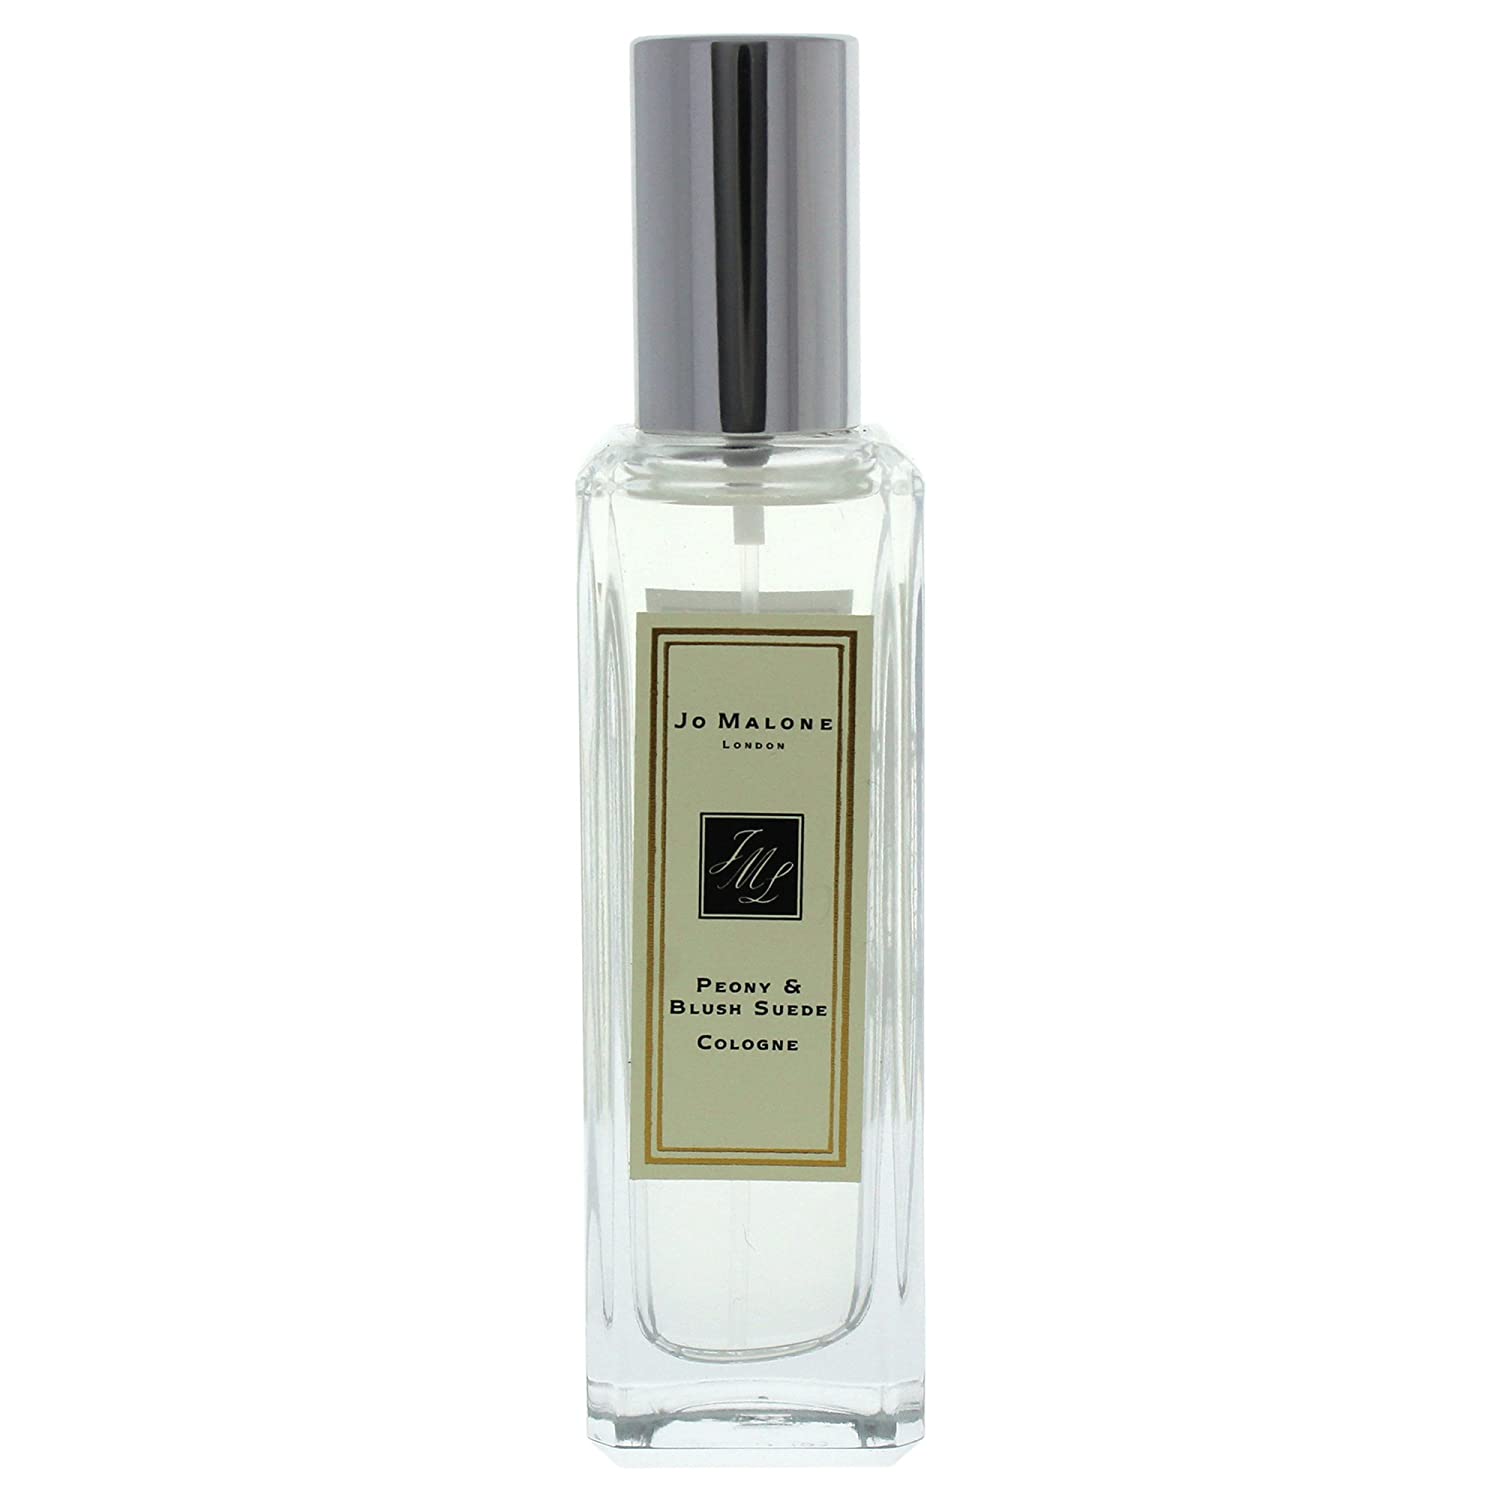 ''Jo Malone Peony & Blush Suede COLOGNE Spray for Women, 1 Ounce x 20''